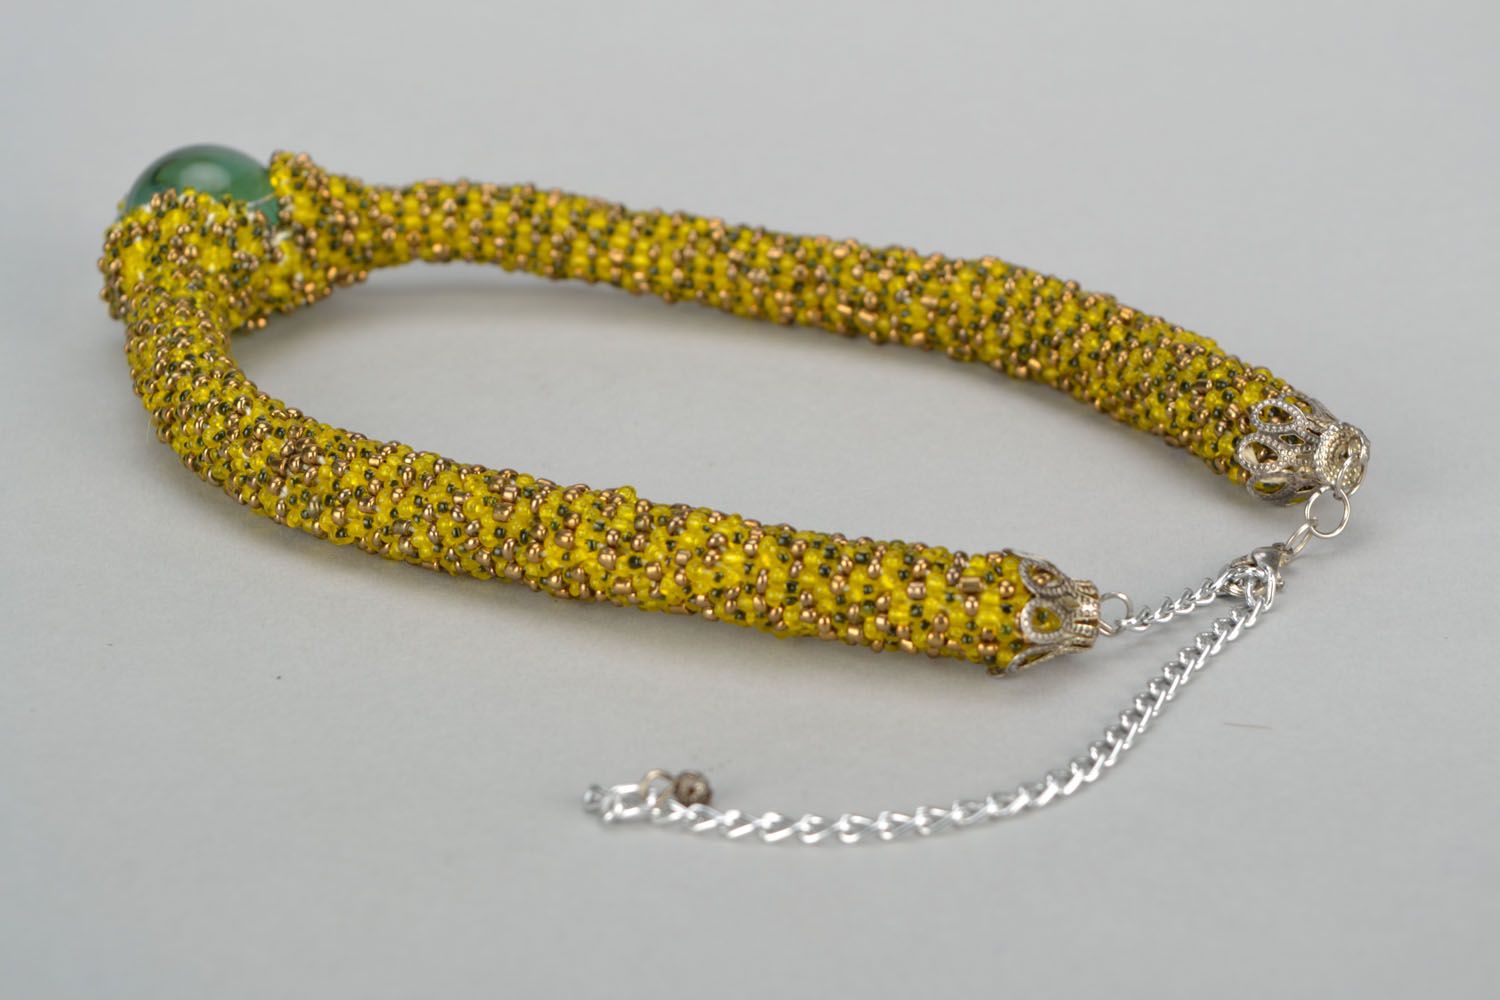 Beaded cord necklace with a glass bead photo 4